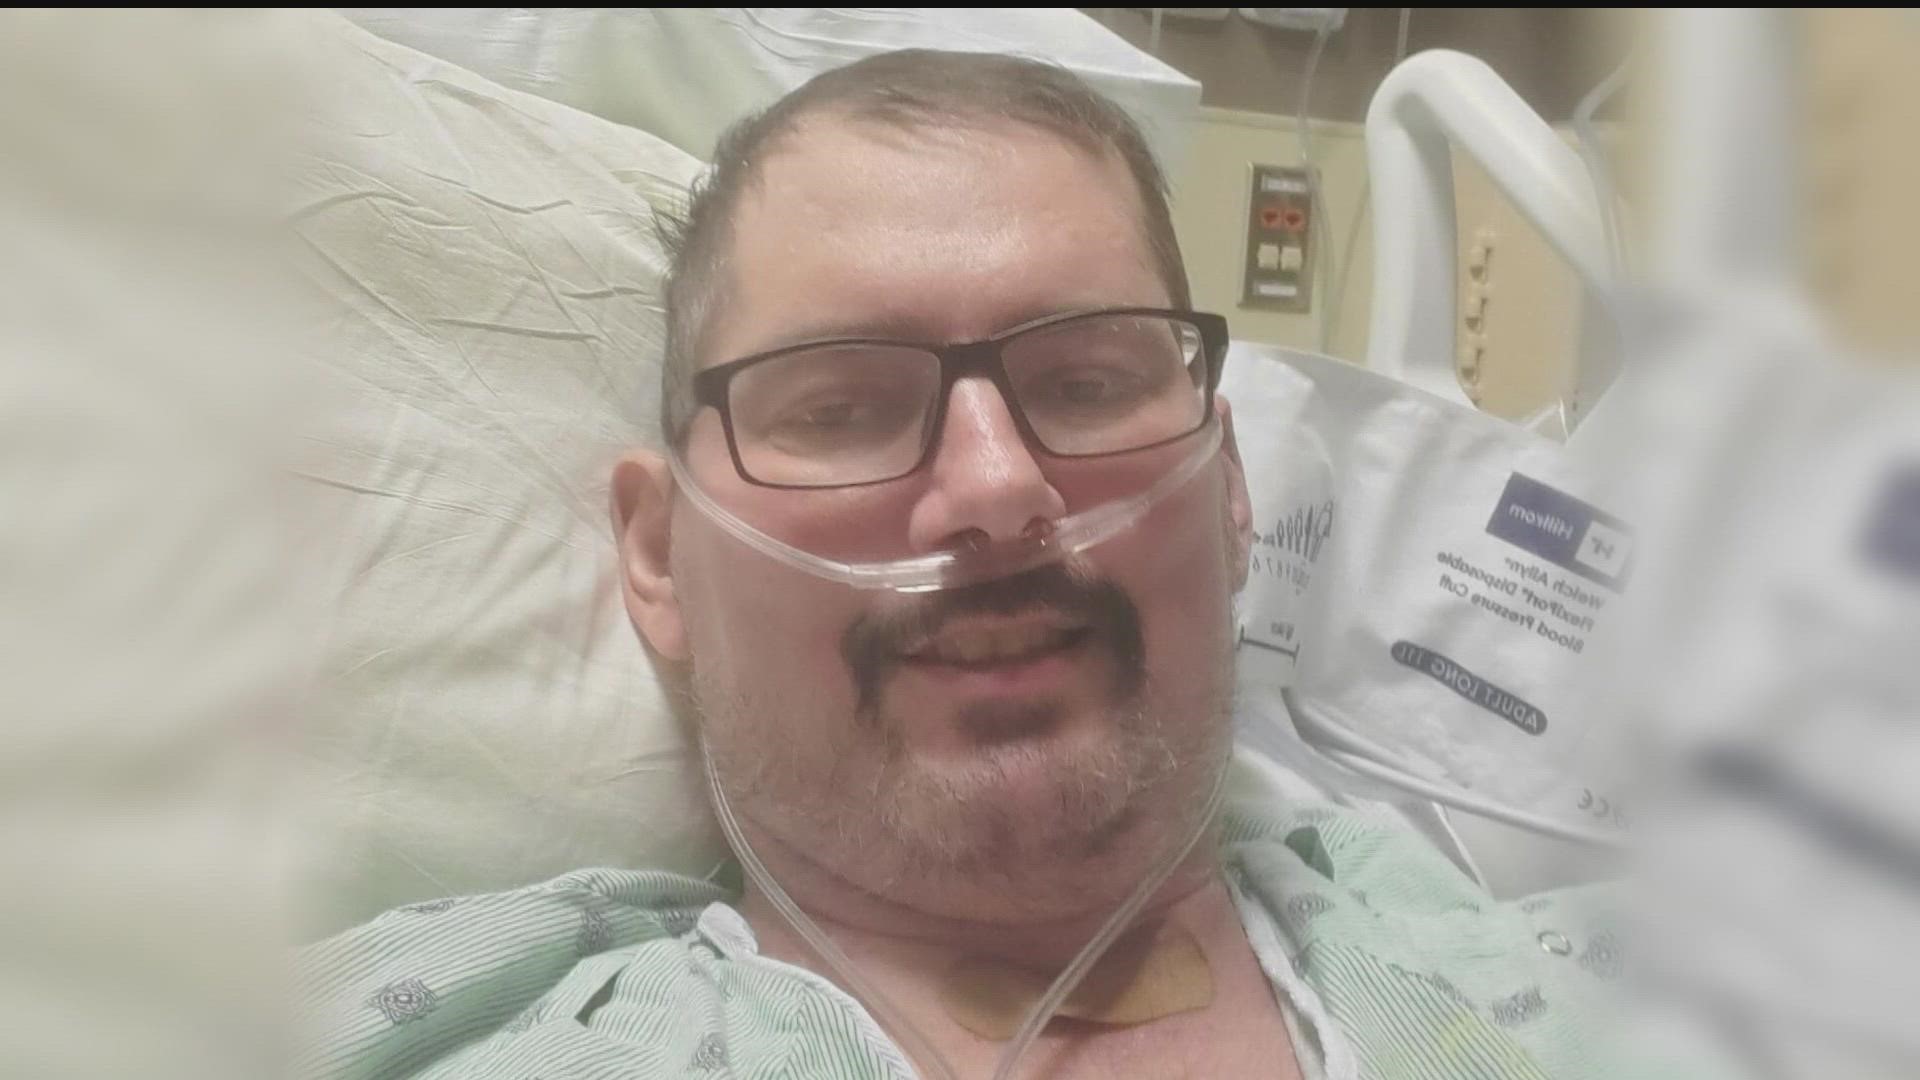 The former dairy farmer underwent two lung transplants after being connected to a ventilator.